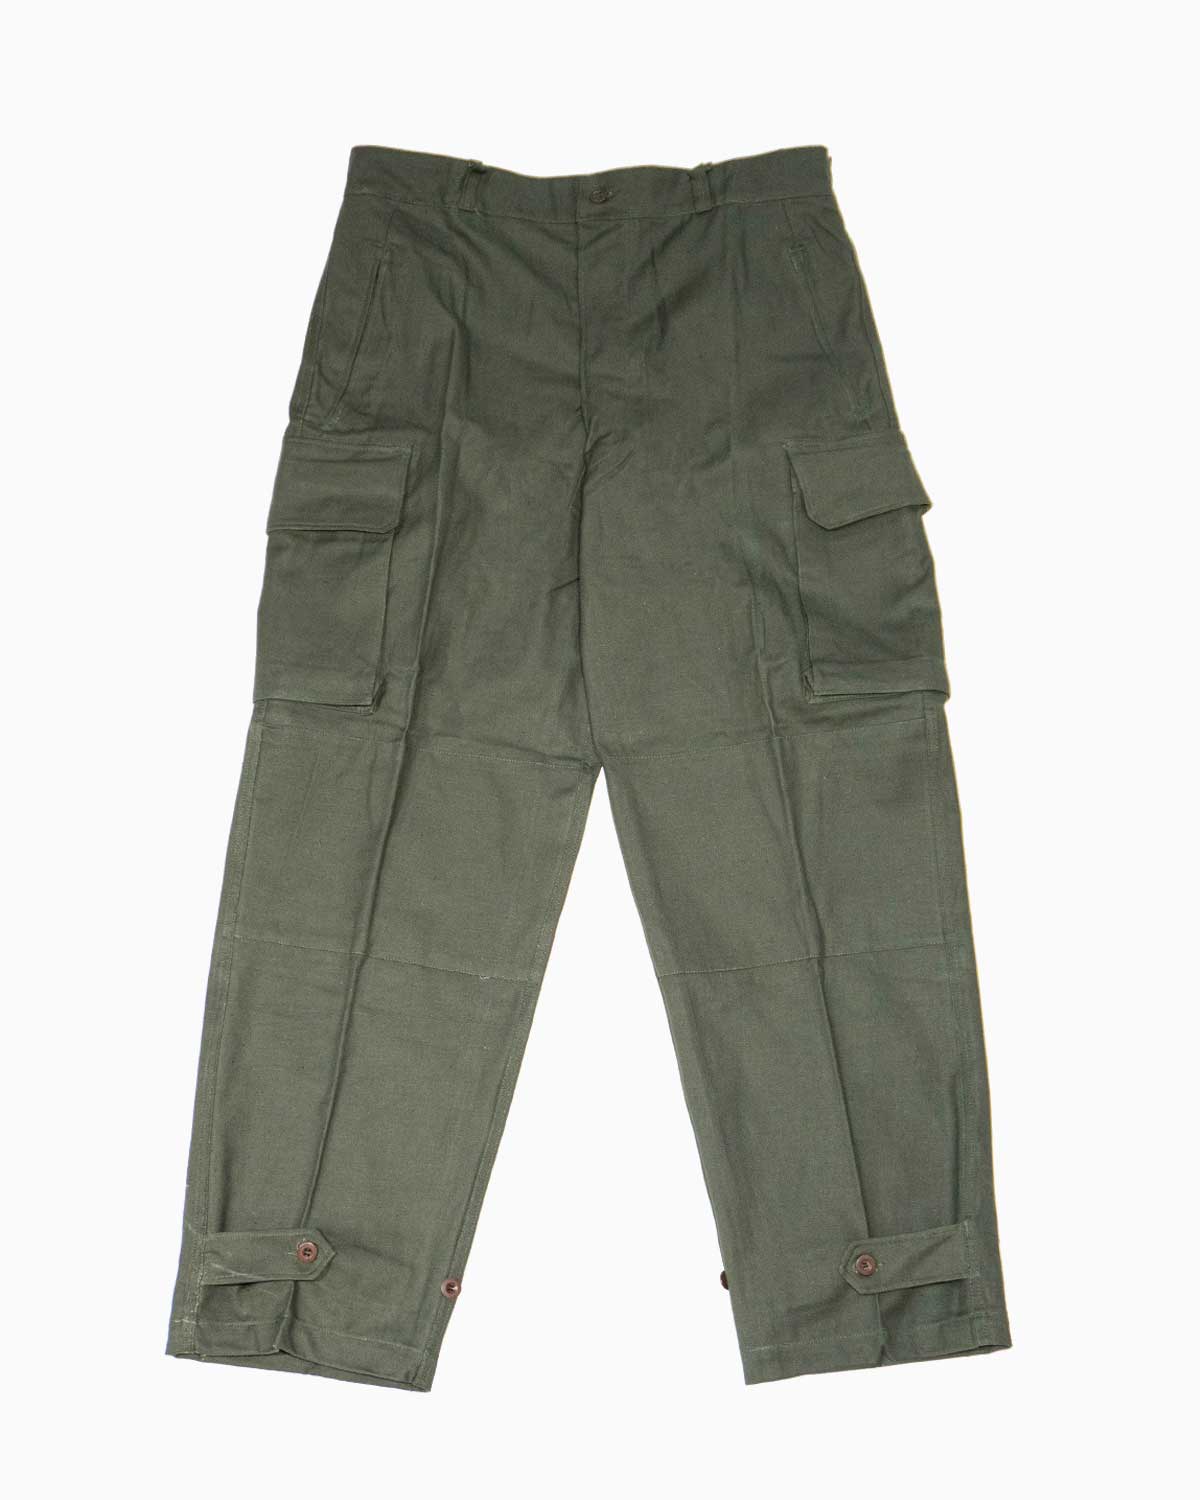 FRENCH airforce M-47 trousers